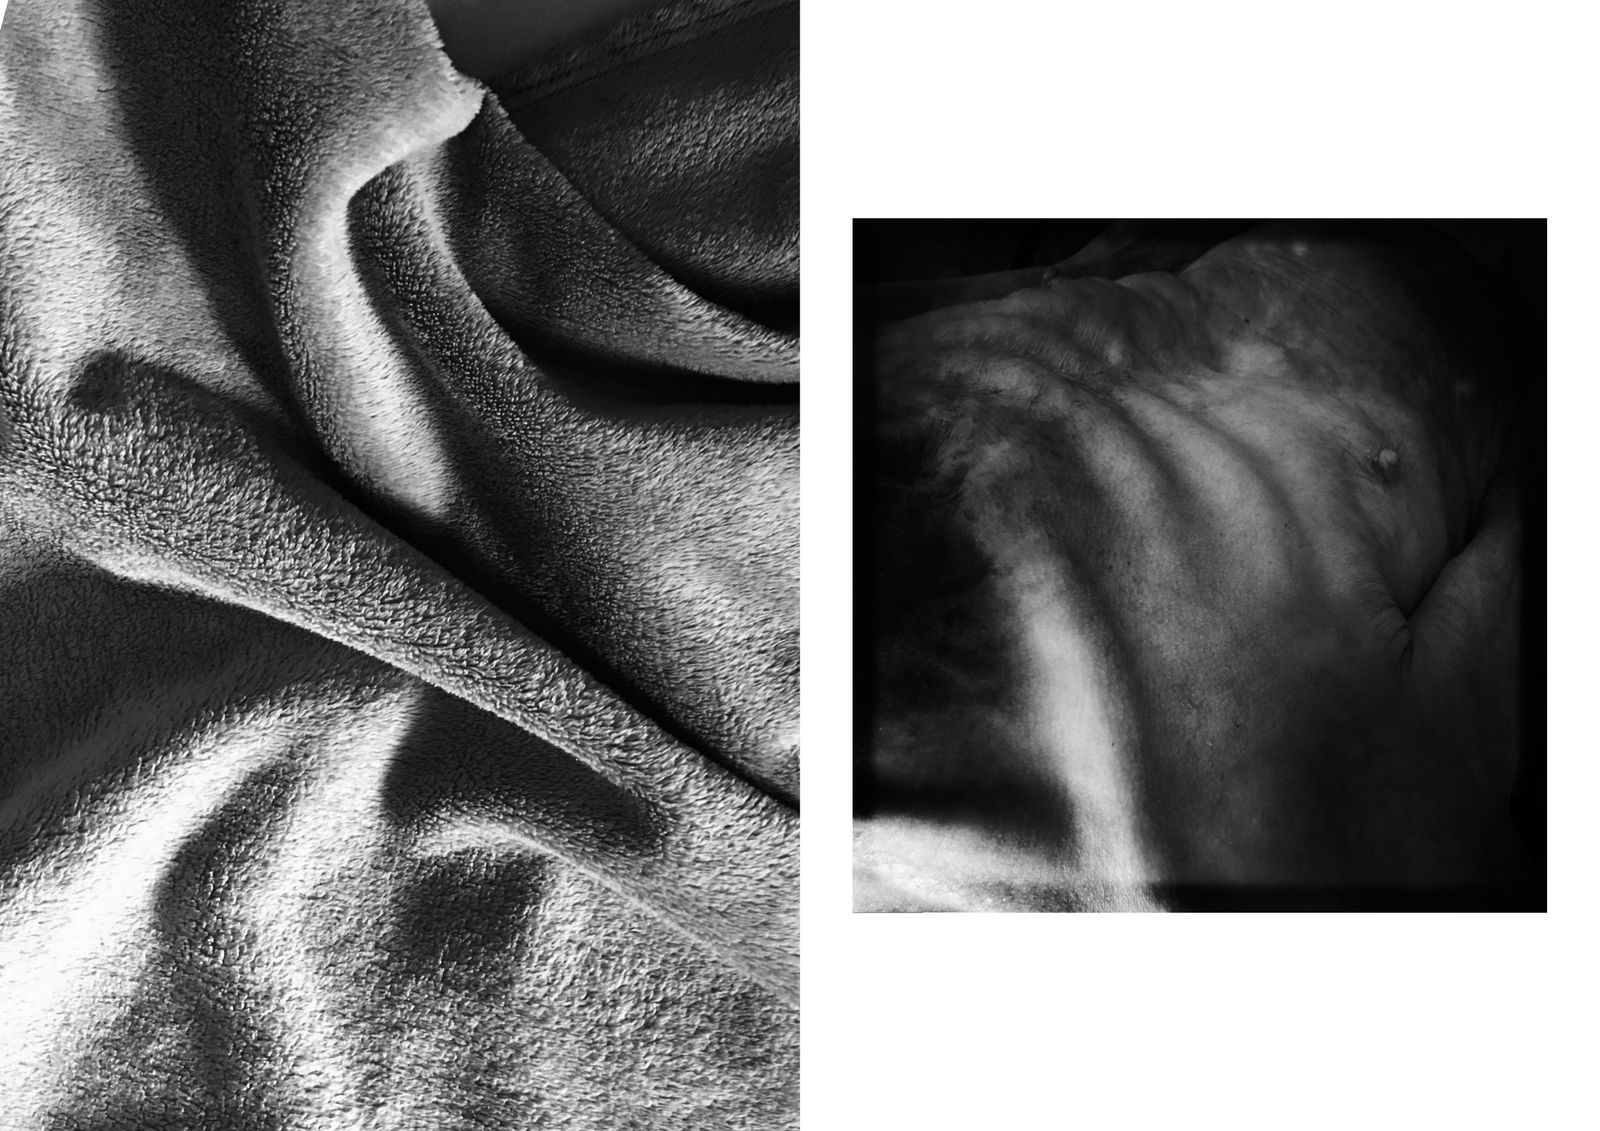 © Celante - Image from the Esmoressências (faded essences) photography project